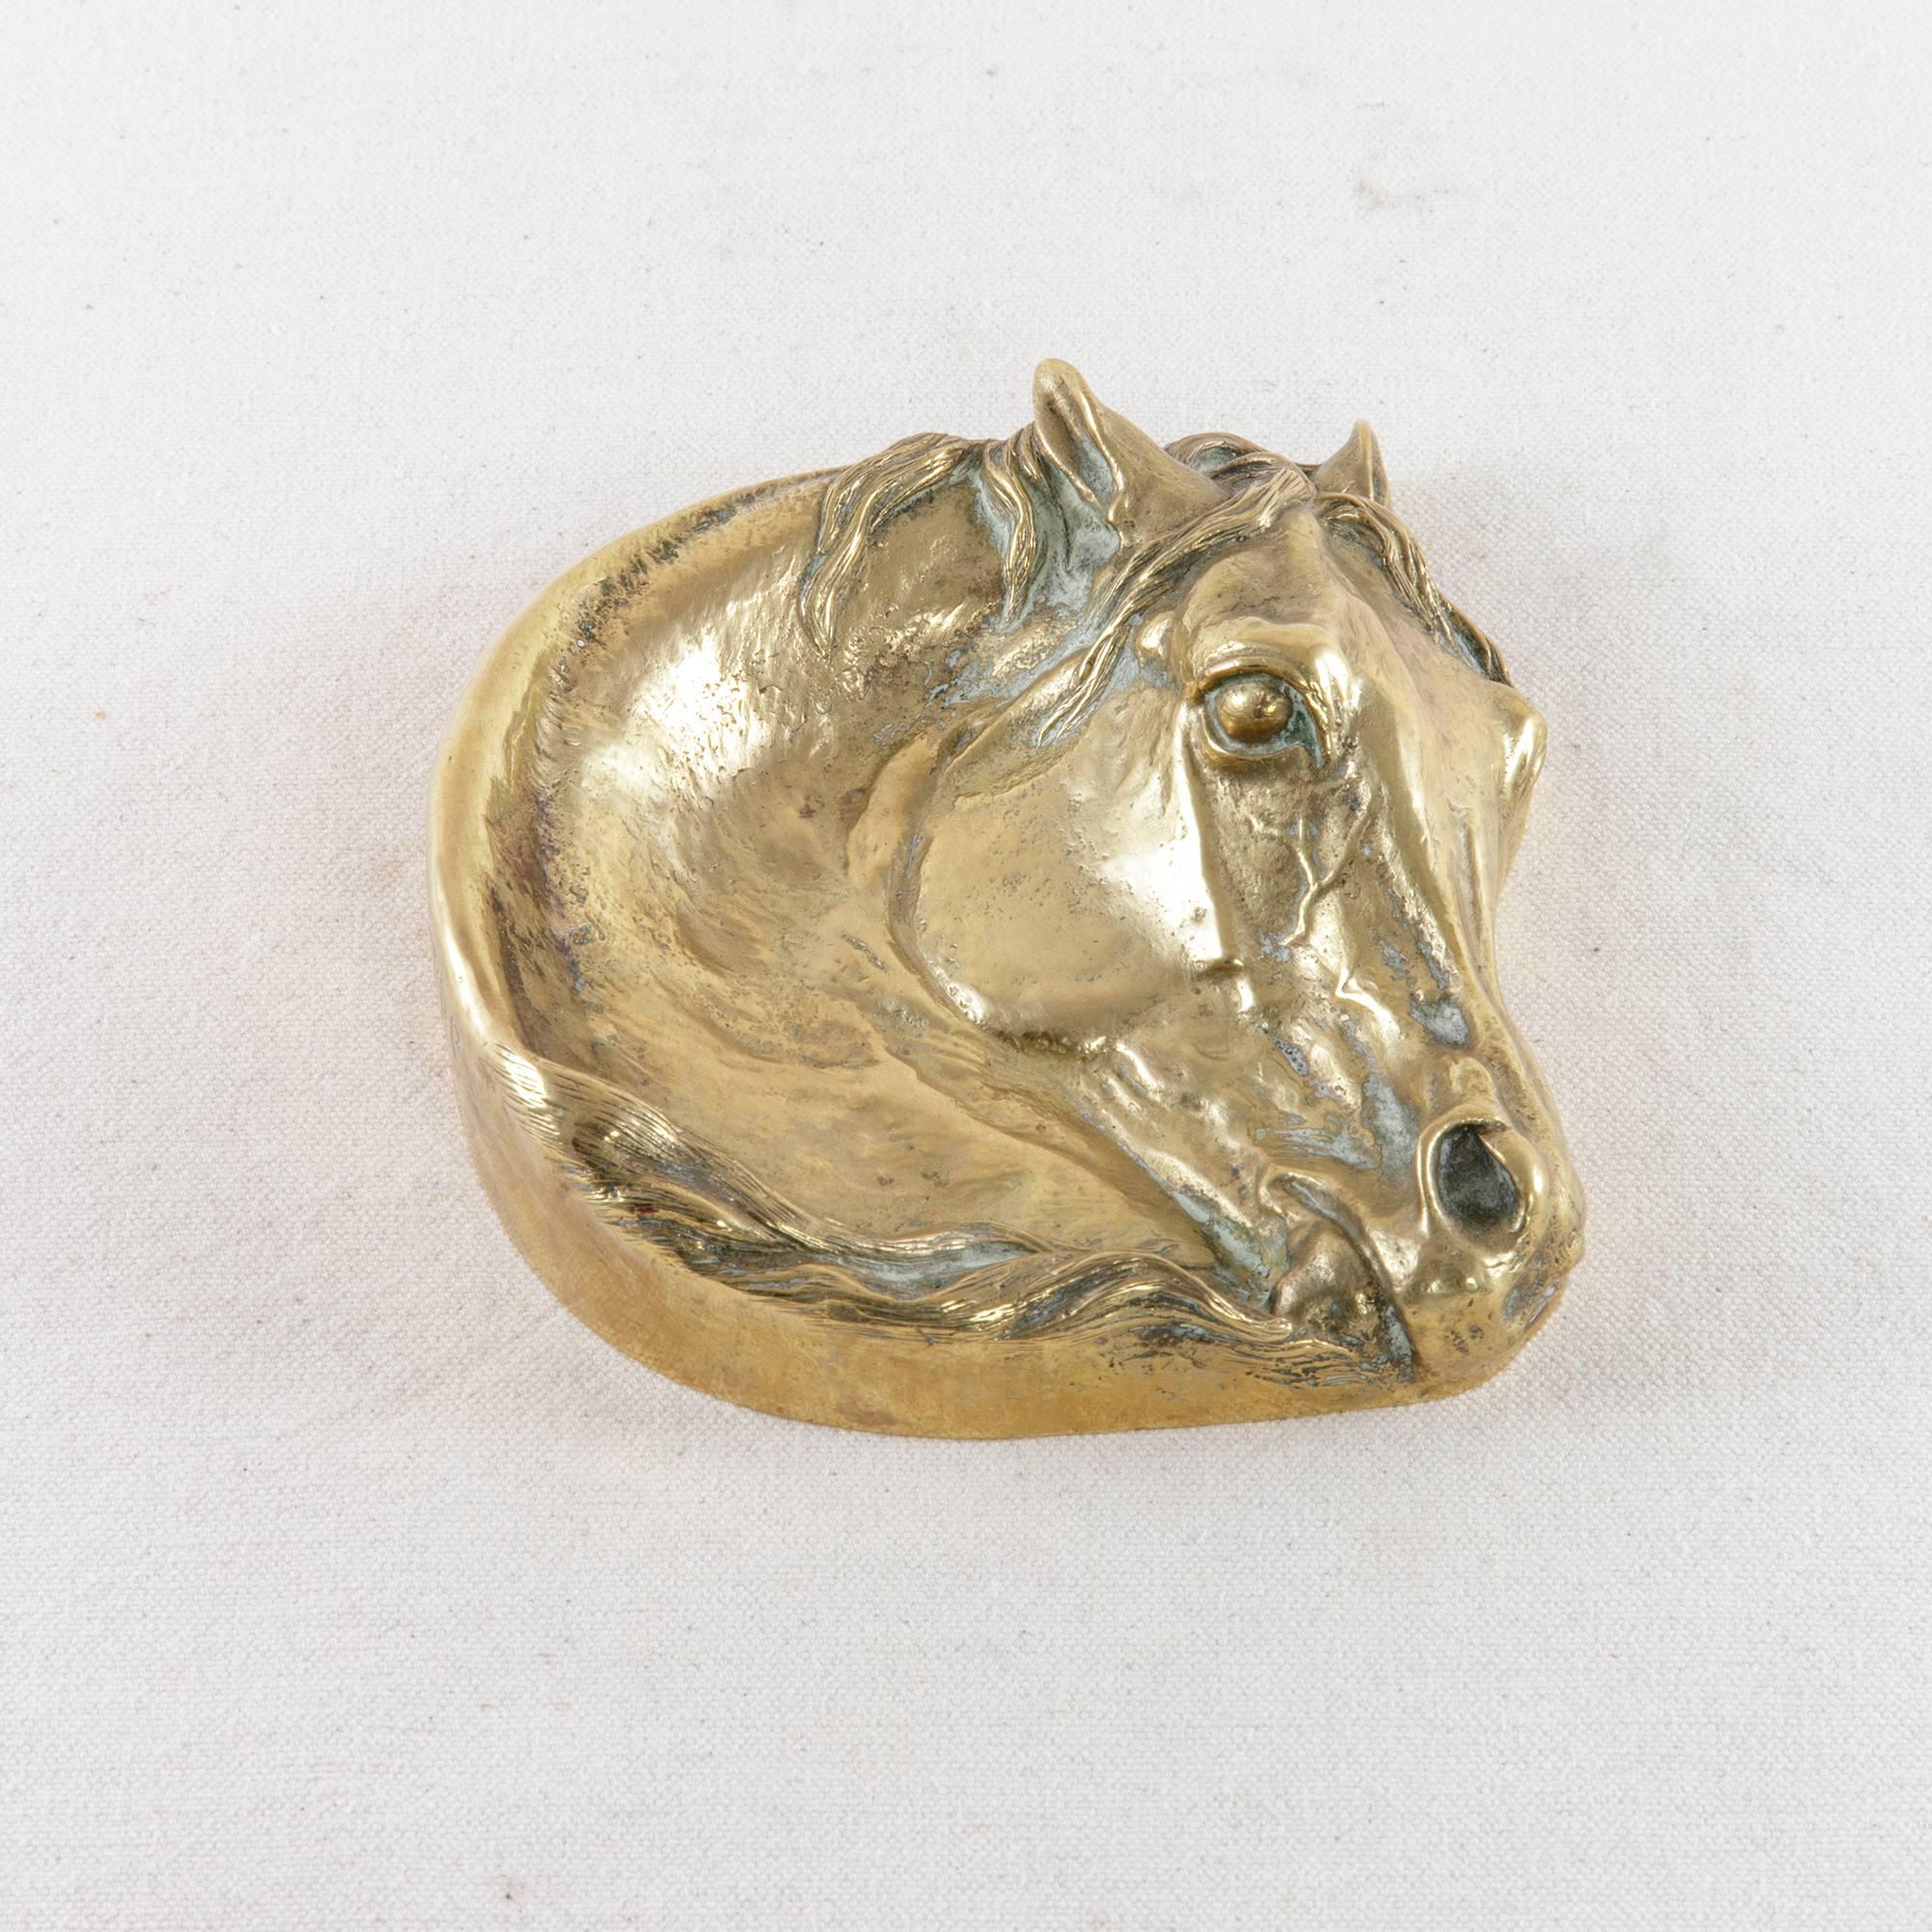 This bronze vide poche, or empty-your-pockets dish, in the shape of a horse's head is signed in Cyrillic letters, E. Lancere. Attributed to the Russian artist, Evgeni Aleksandrovich Lancere (1848-1886), who was a master of sculpture and specialized